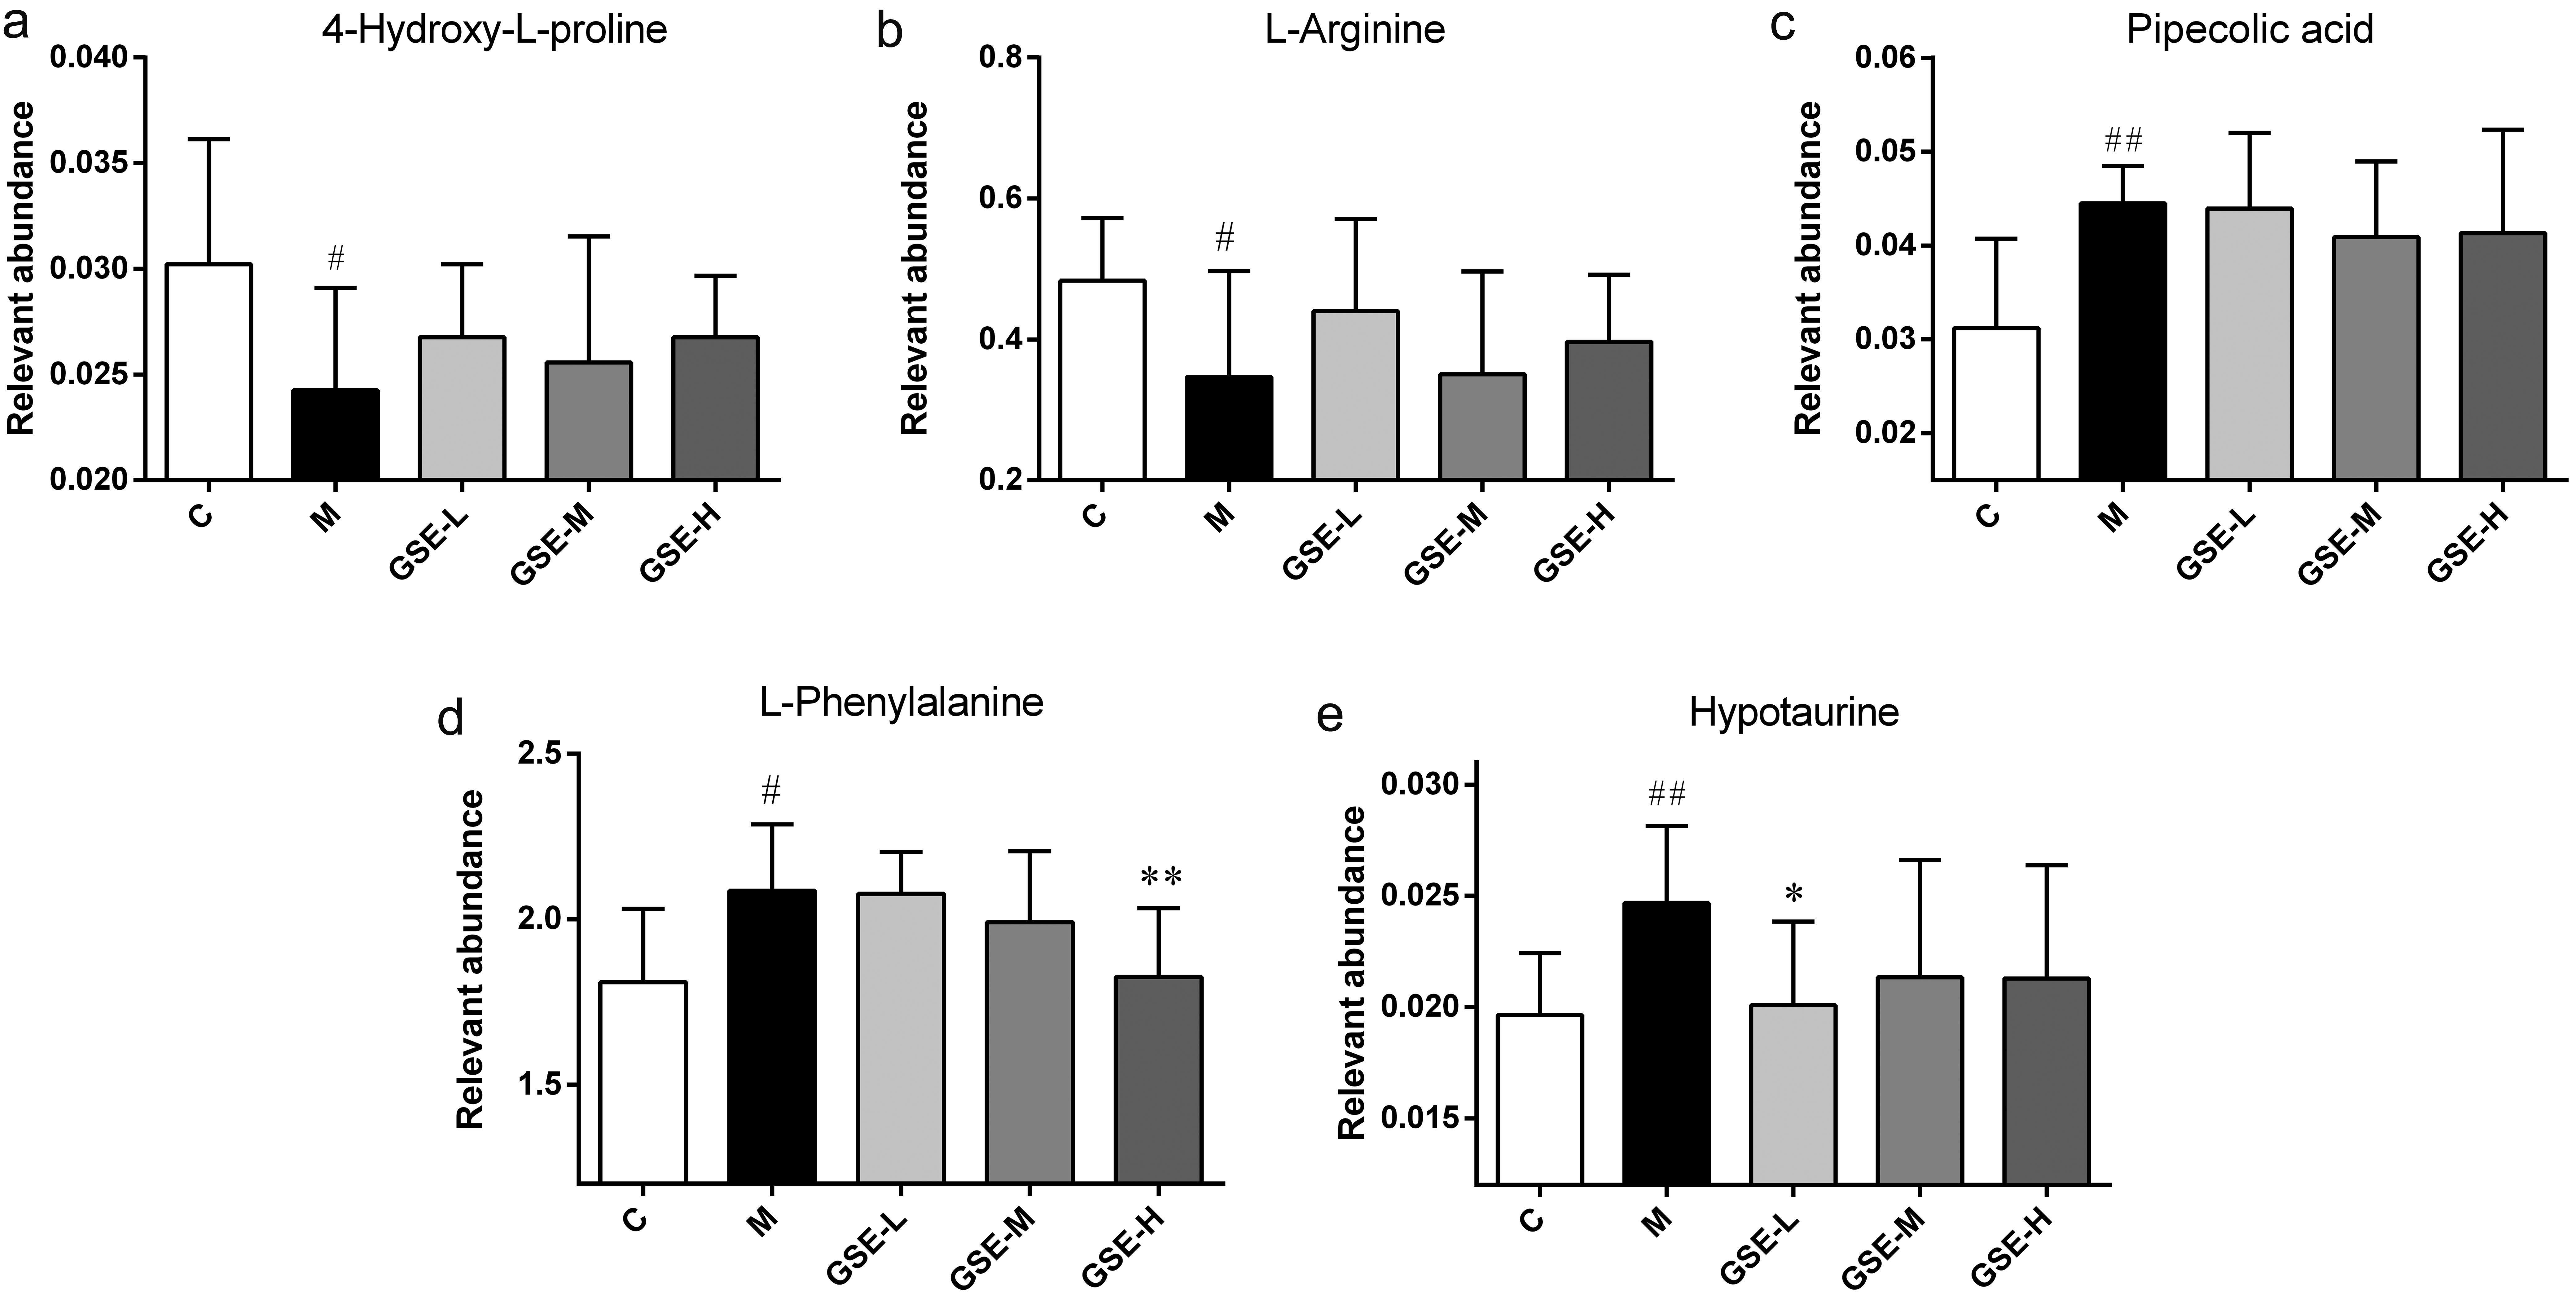 Relative abundance of amino acids in lung tissue and serum of rats after PM2.5 instillation.